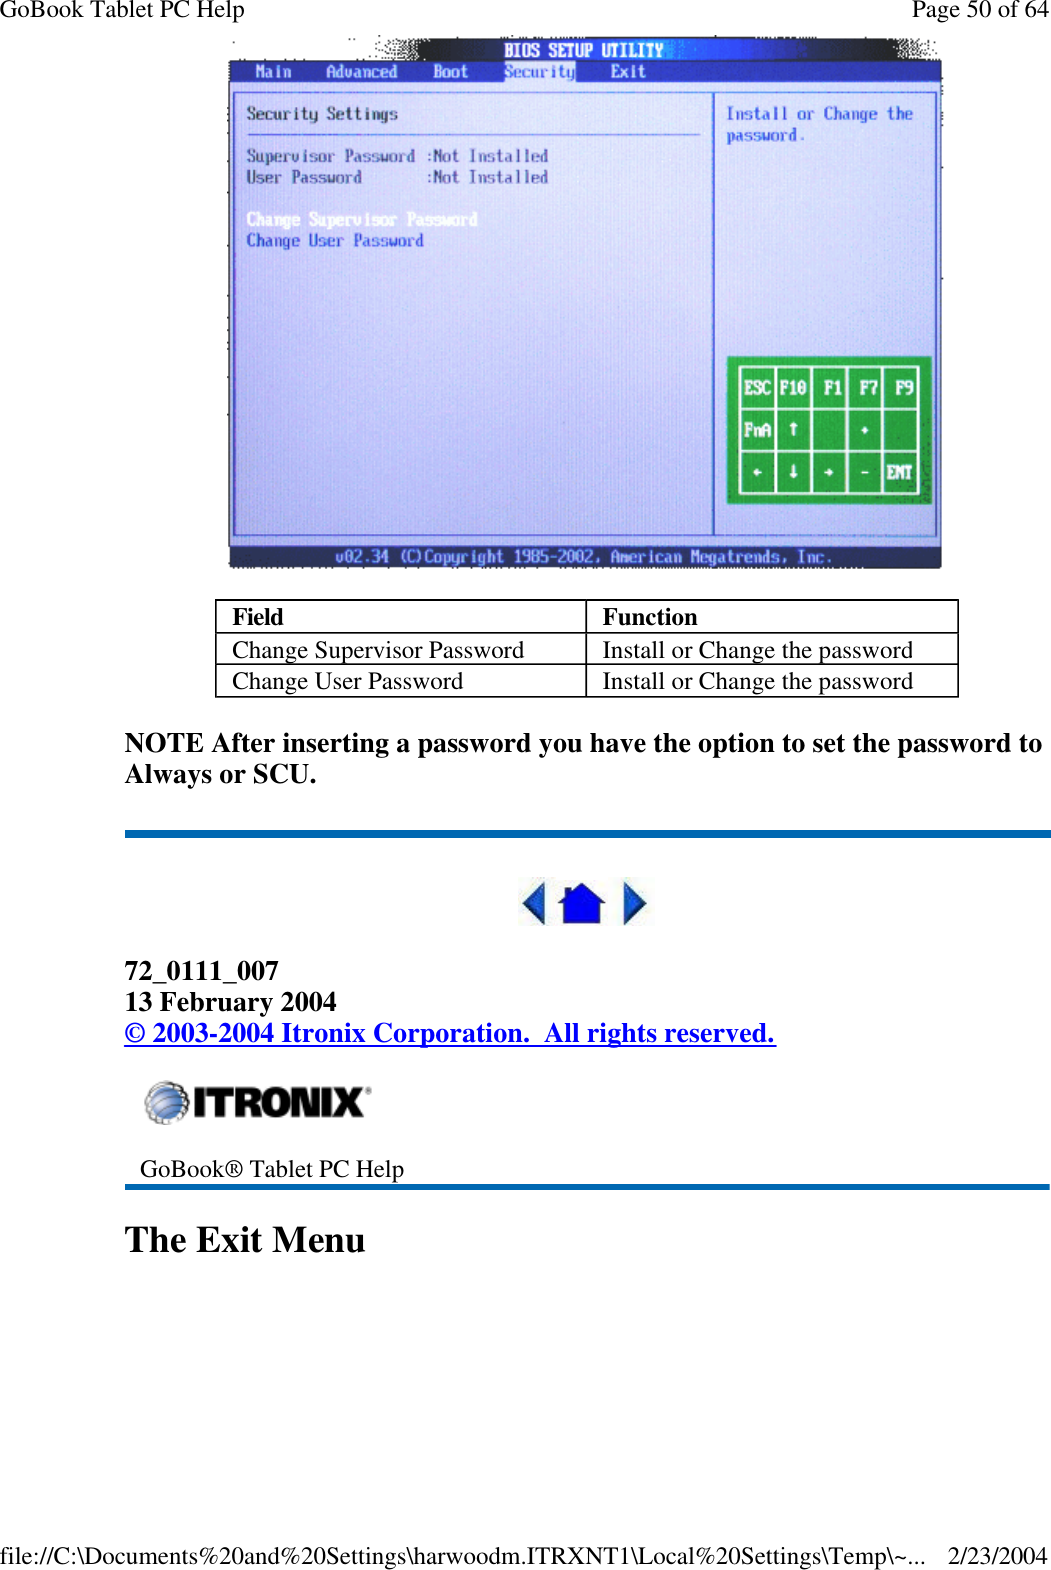  NOTE After inserting a password you have the option to set the password to Always or SCU.  72_0111_007 13 February 2004 © 2003-2004 Itronix Corporation.  All rights reserved. The Exit Menu Field Function Change Supervisor Password Install or Change the password Change User Password Install or Change the password  GoBook® Tablet PC Help Page 50 of 64GoBook Tablet PC Help2/23/2004file://C:\Documents%20and%20Settings\harwoodm.ITRXNT1\Local%20Settings\Temp\~...